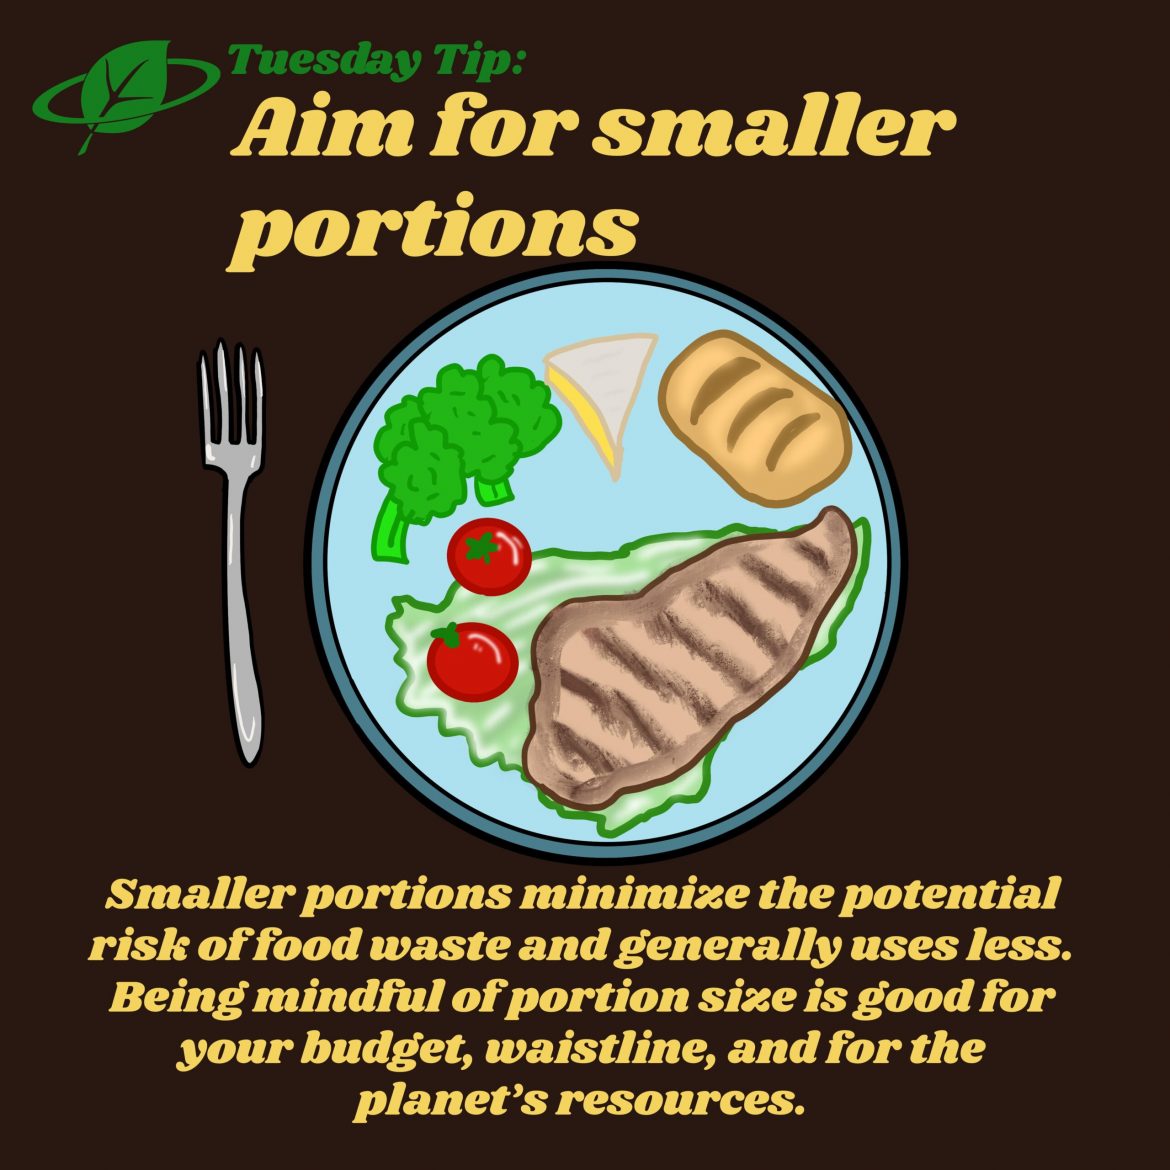 Aim for smaller portions | Tuesday Tip